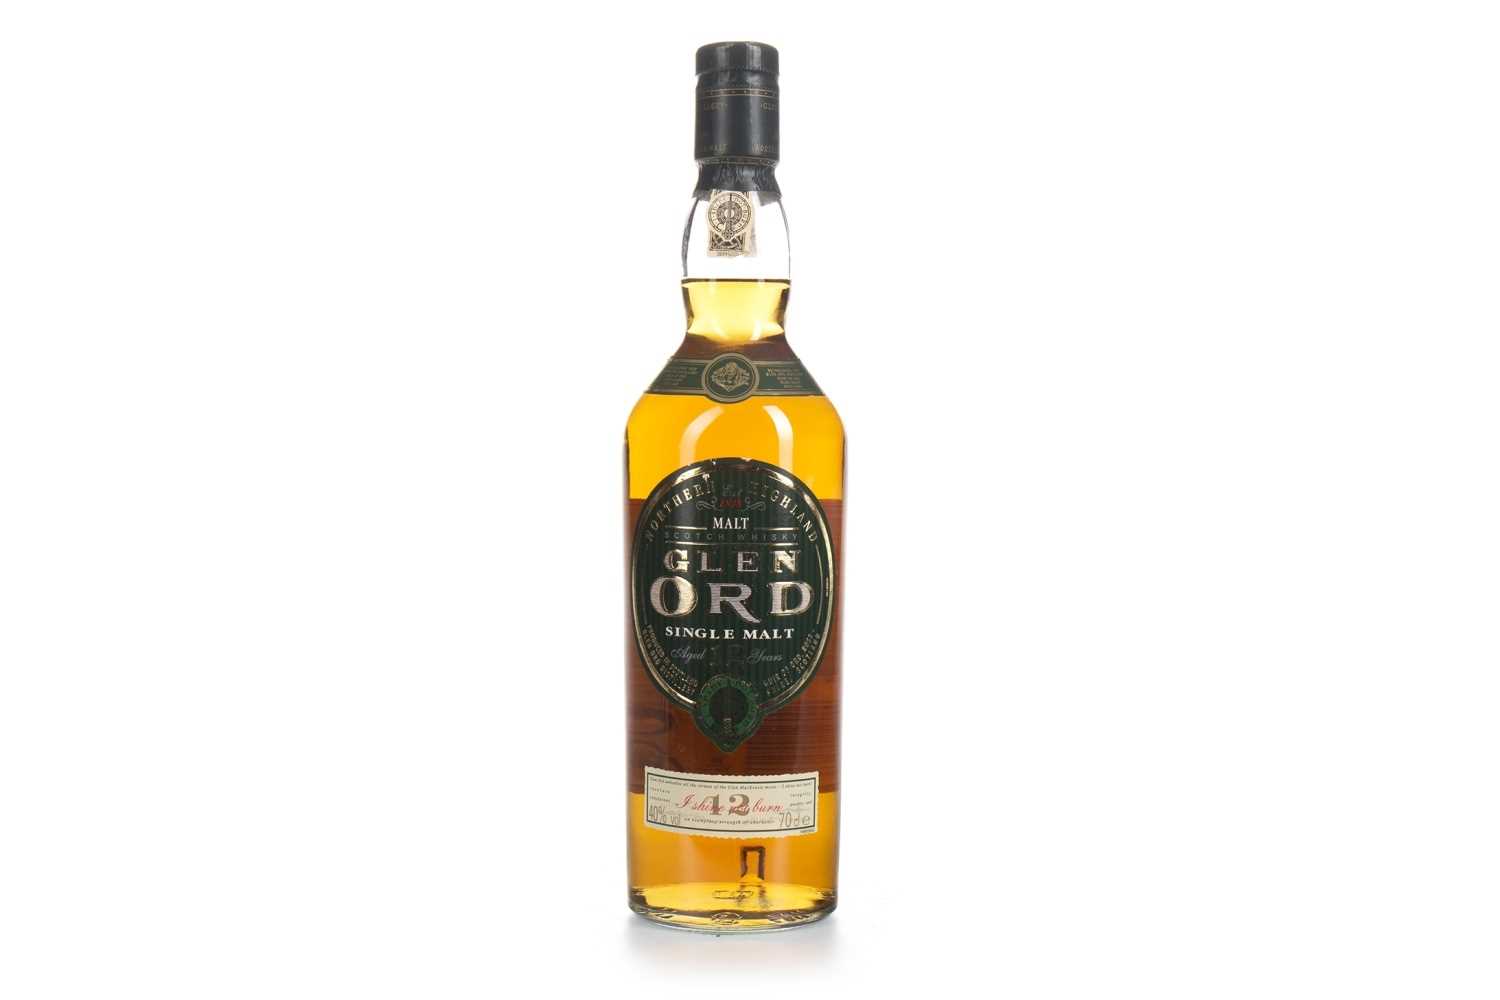 Lot 340 - GLEN ORD AGED 12 YEARS